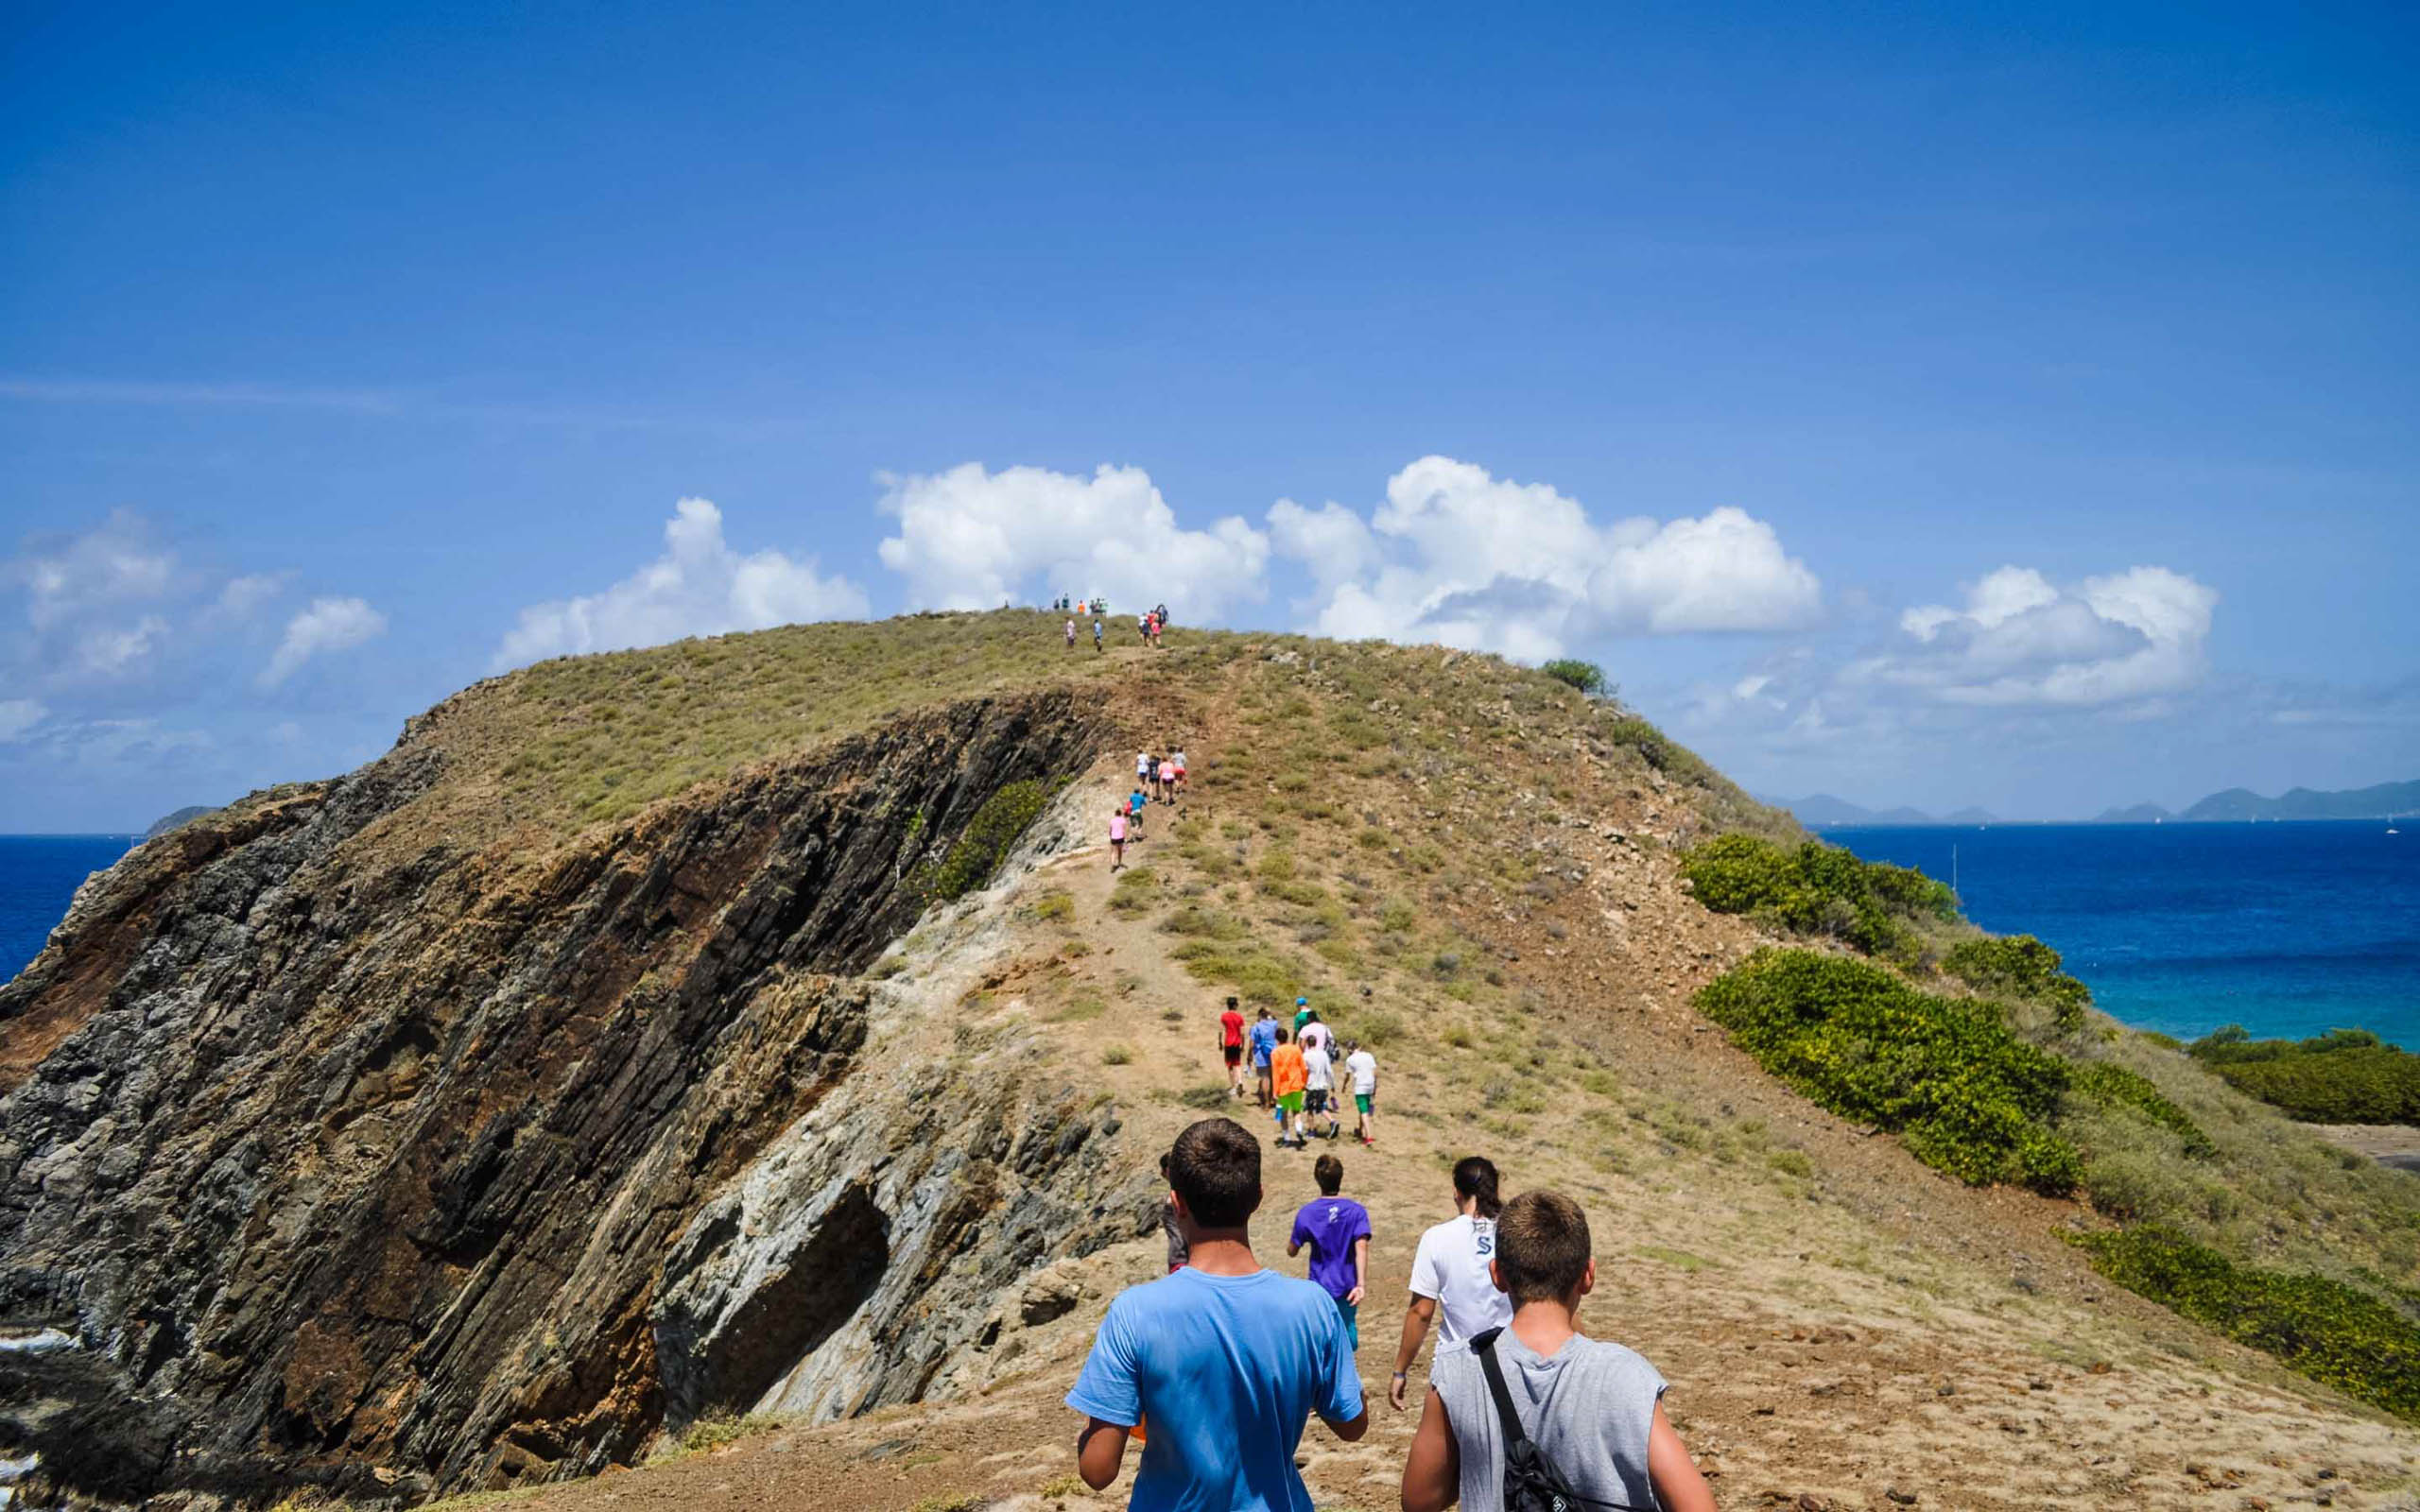 A group of people walking up a hill near the ocean.